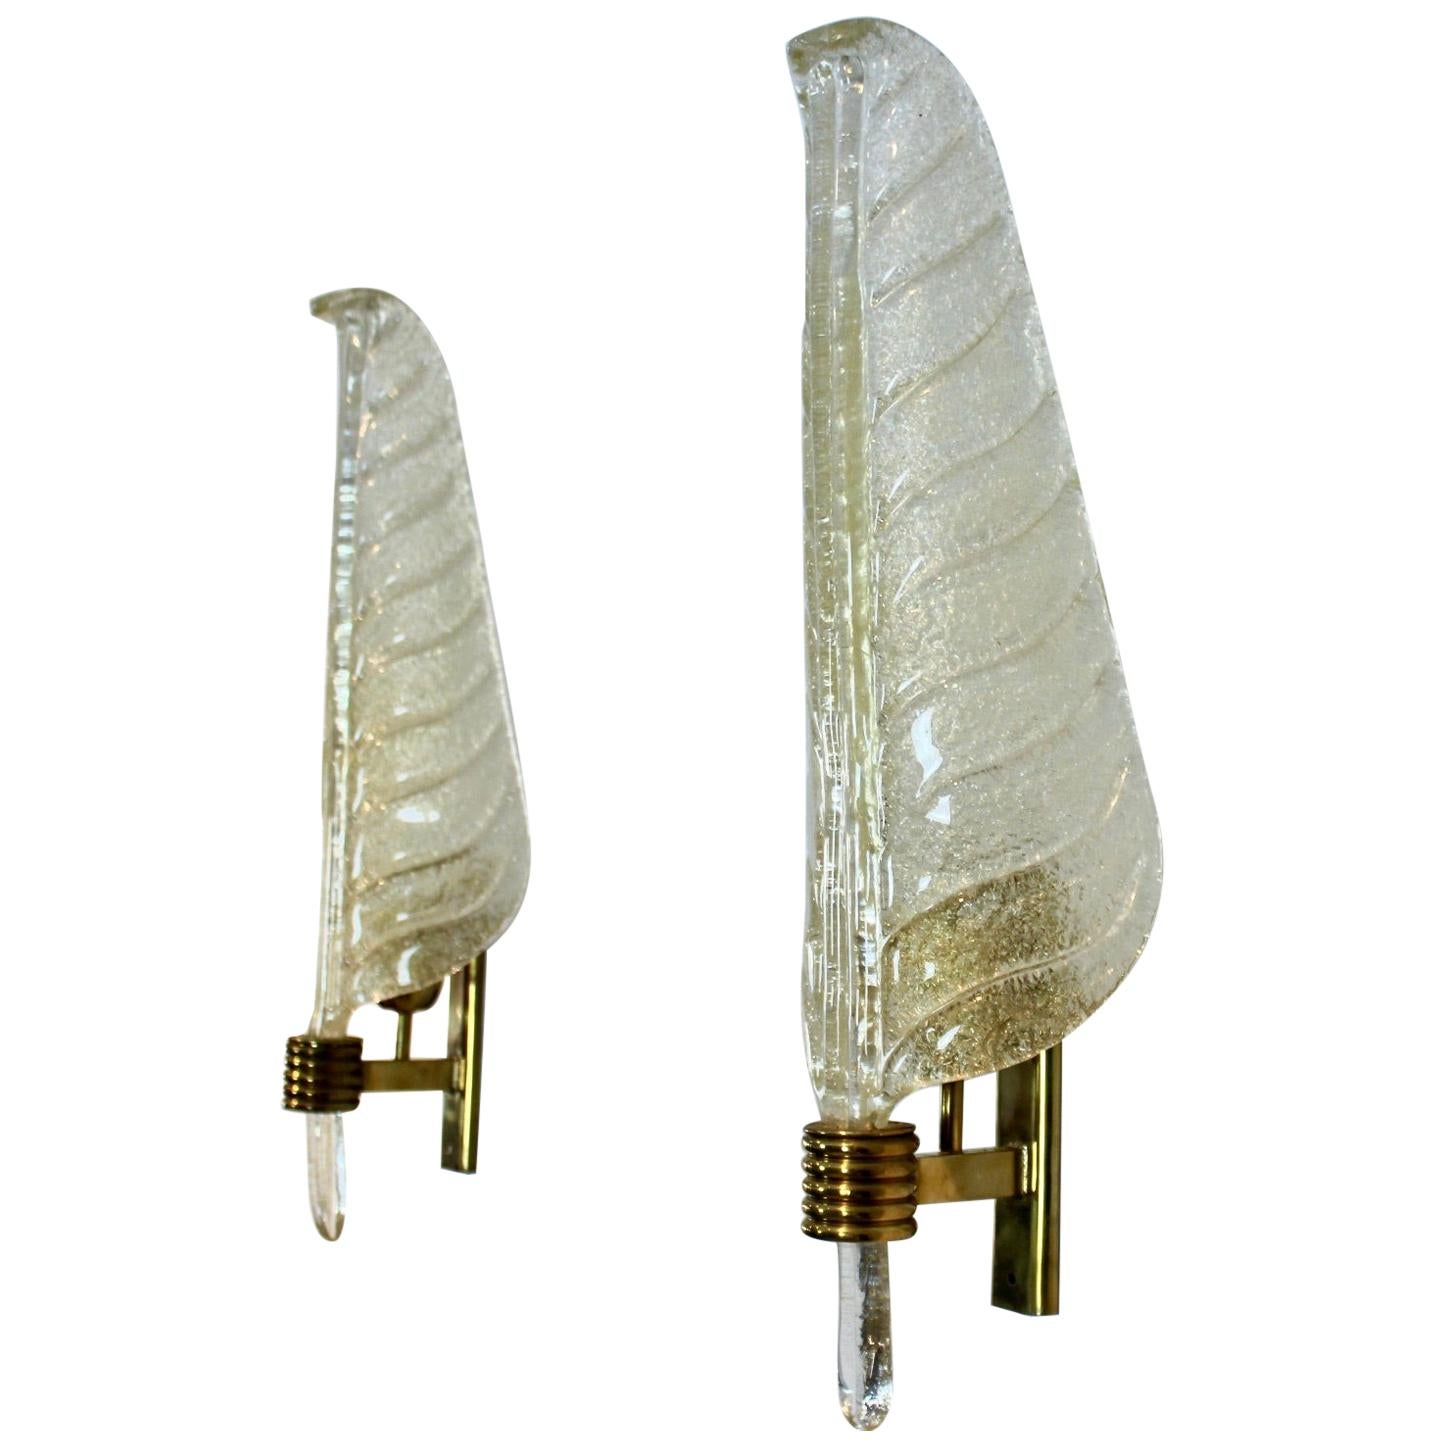 Glamorous Pair of Xl Murano 24kt Gold Flaked Glass Leaf Sconces, Barovier & Toso